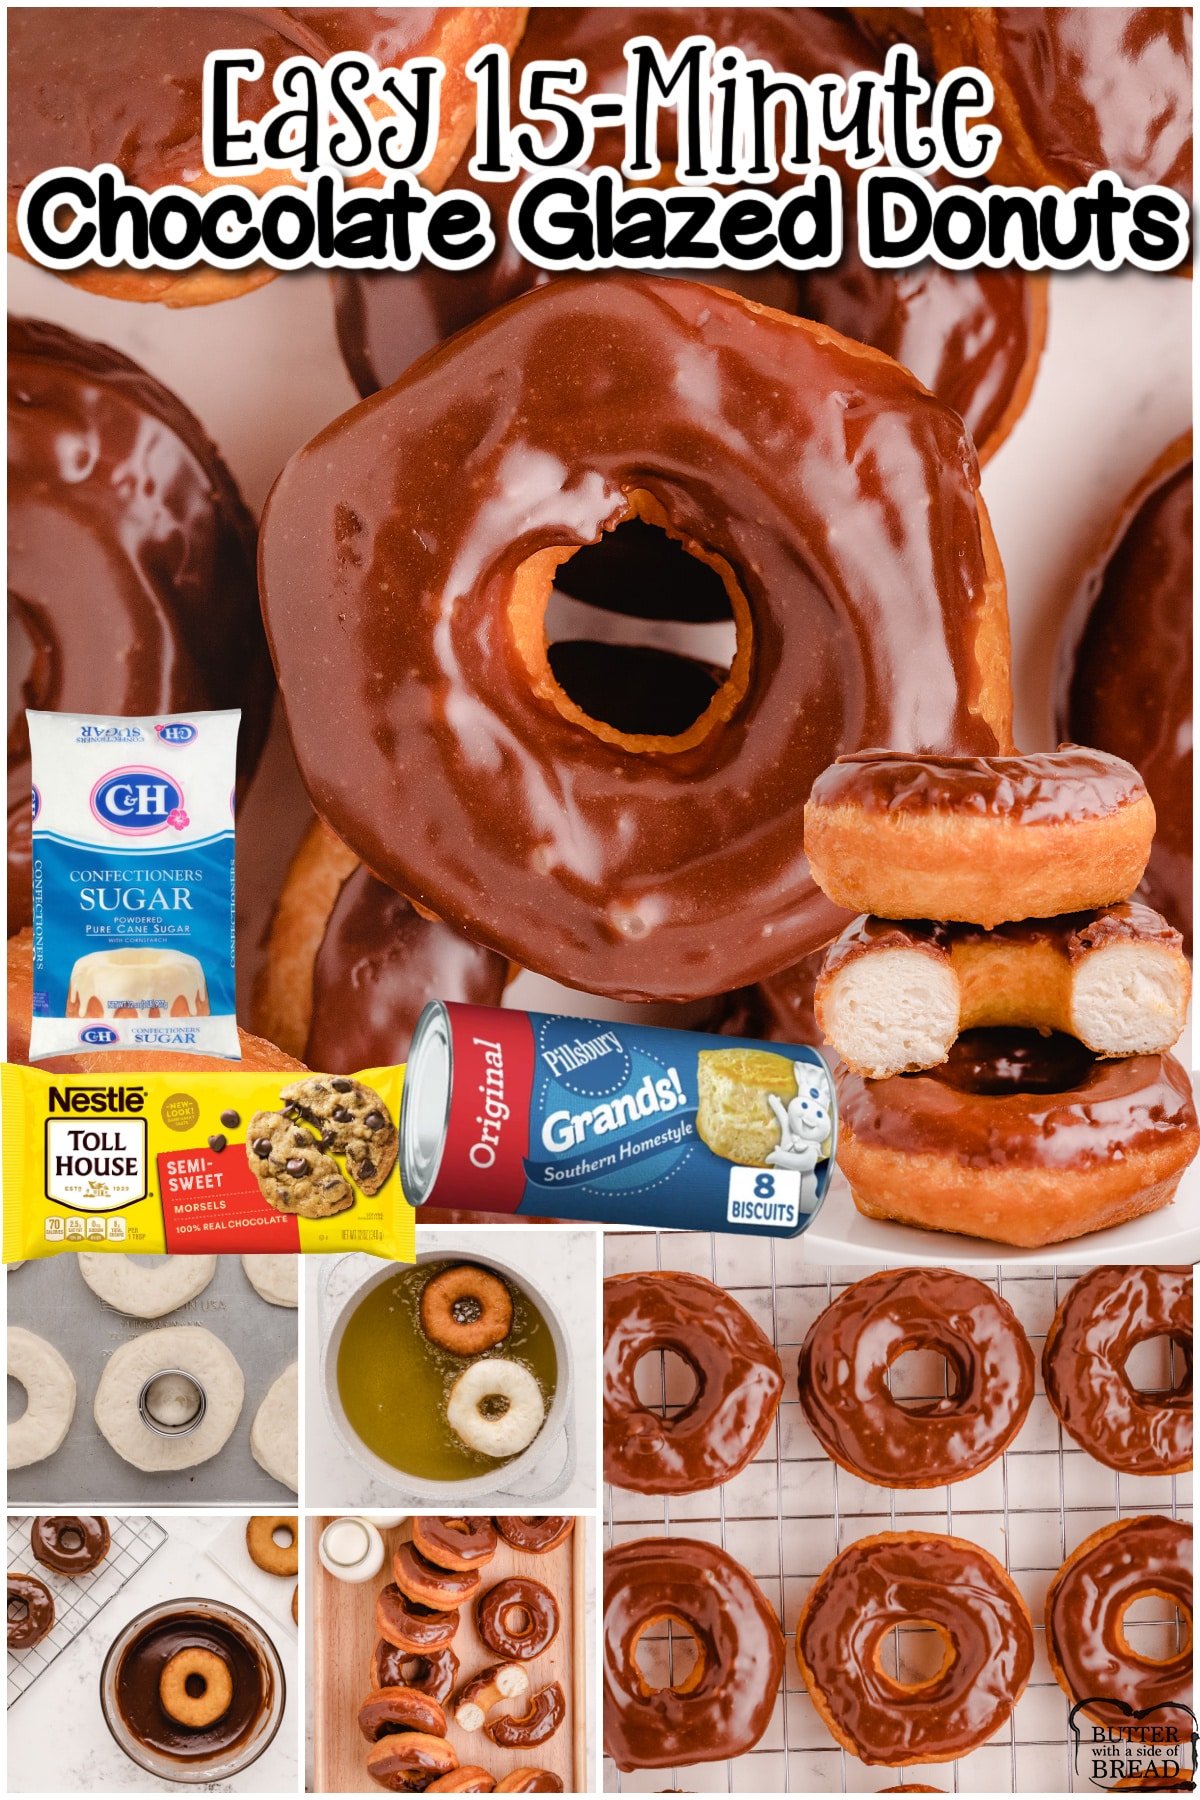 Chocolate Glazed Donuts made quick & easy with crescent dough & delicious buttery chocolate glaze. Better than store-bought; you'll make them again & again!